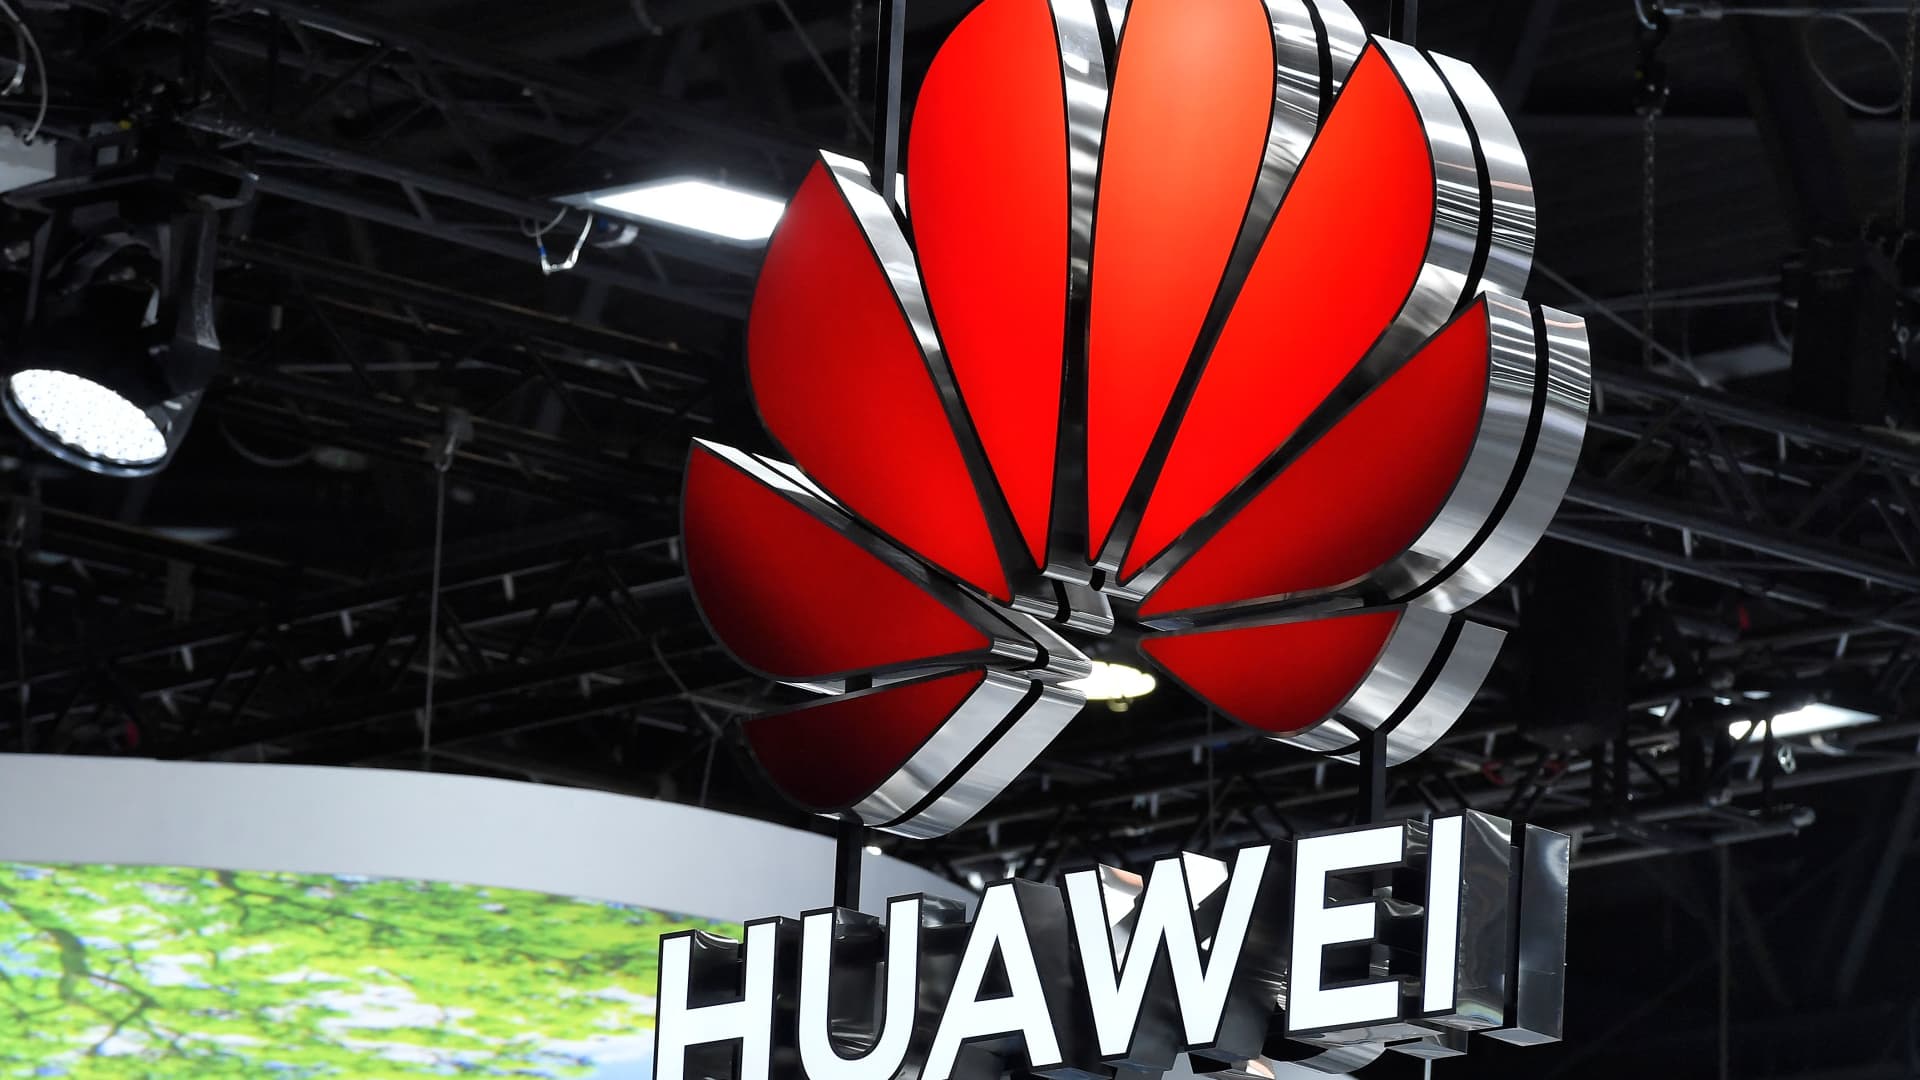 Germany reportedly weighing Huawei 5G ban. China says it is 'puzzled'